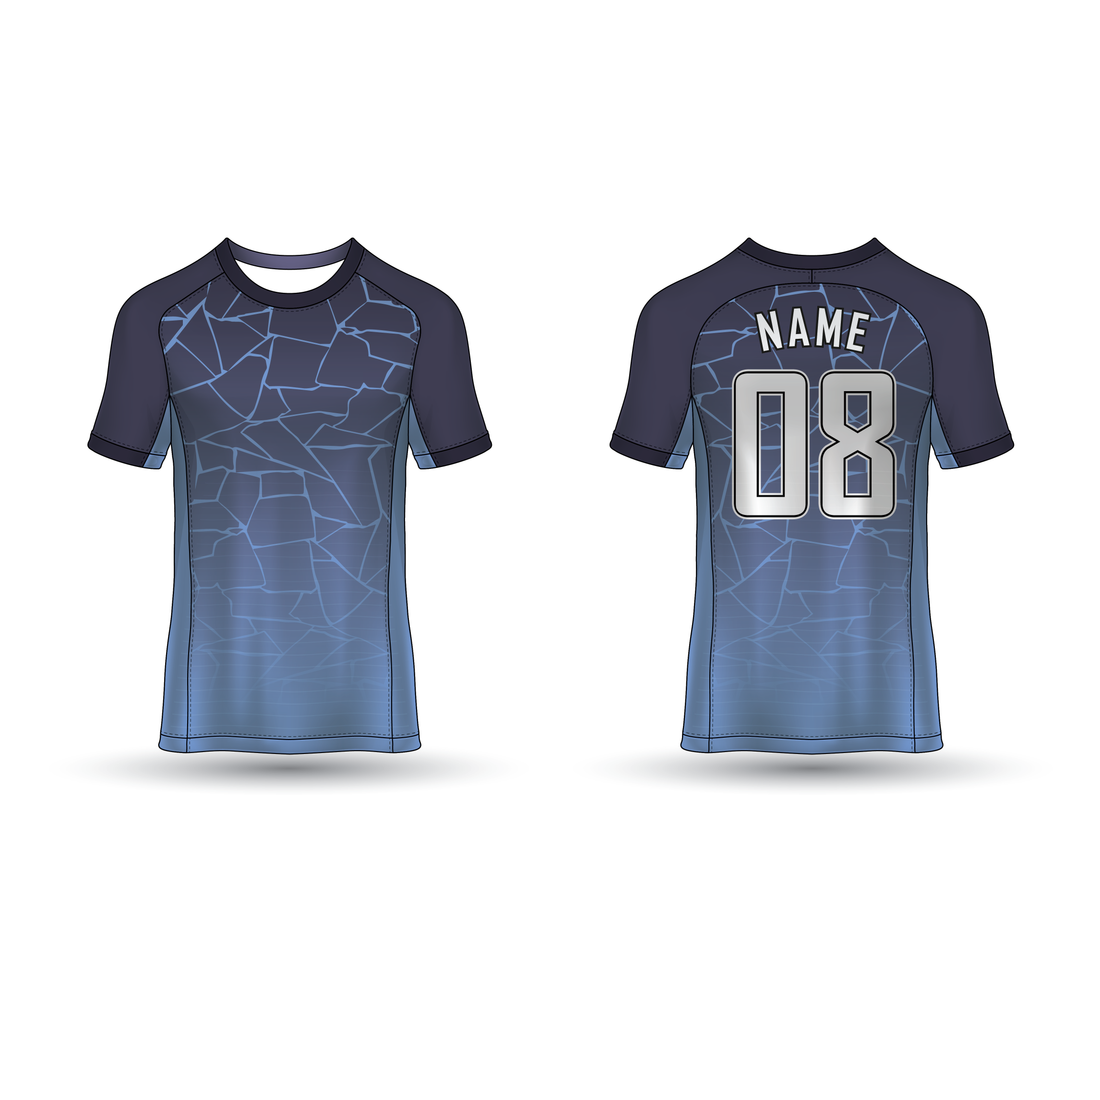 NEXT PRINT All Over Printed Customized Sublimation T-Shirt Unisex Sports Jersey Player Name & Number, Team Name NP50000275